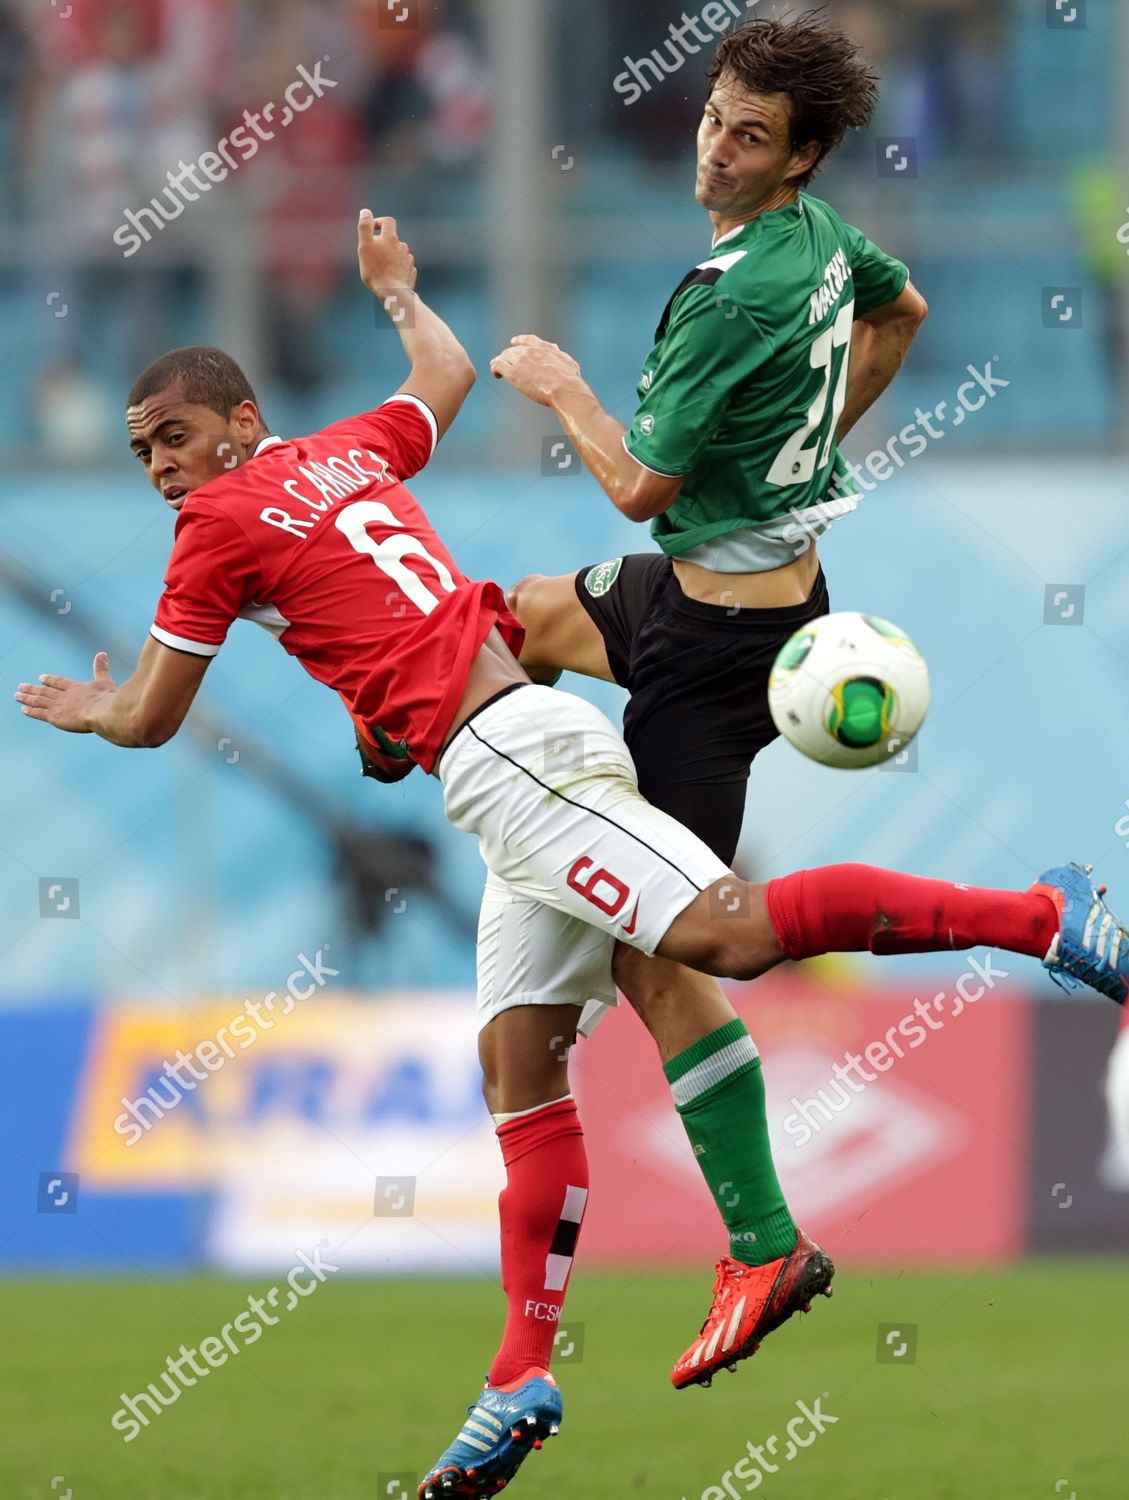 Rafael Carioca of FC Spartak Moscow in action during the Russian News  Photo - Getty Images